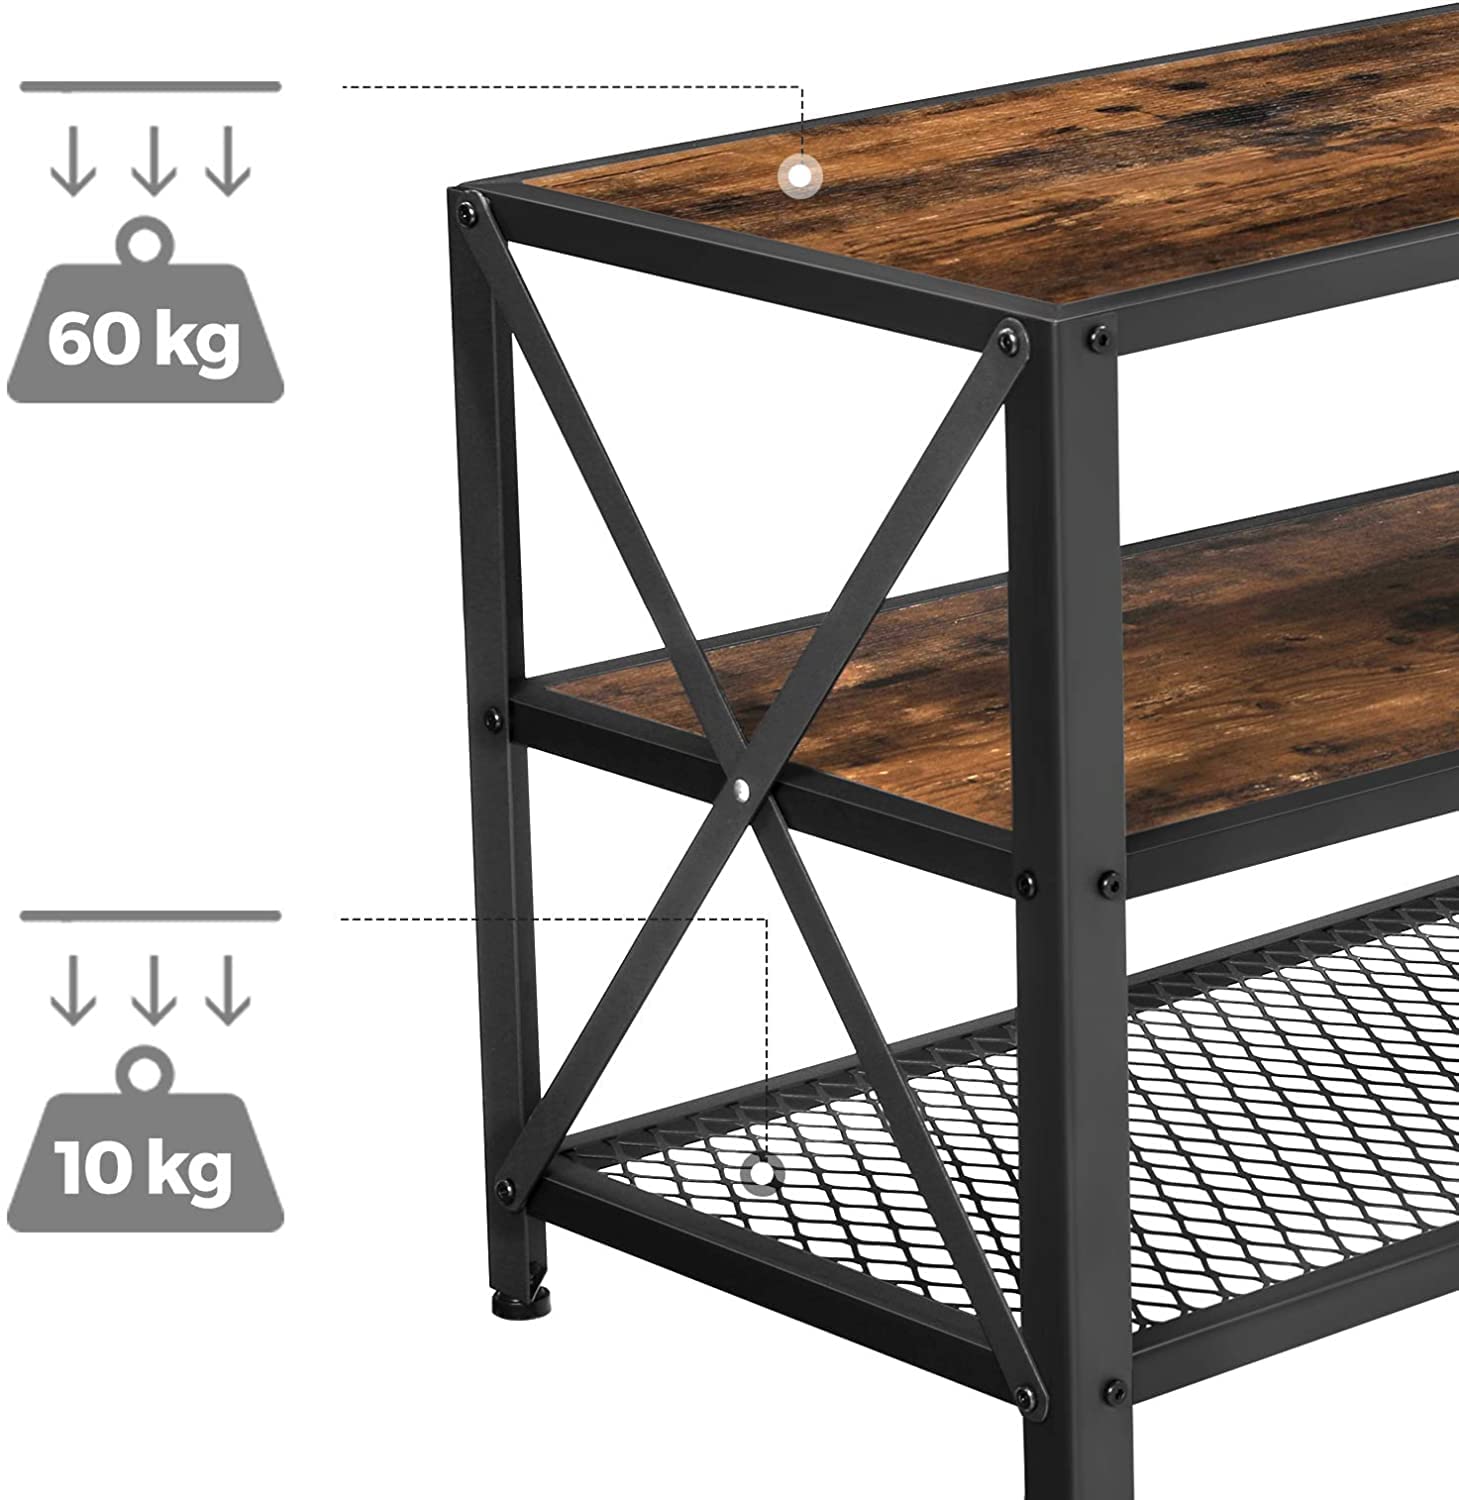 Tv Stand For Tv Steel Frame Up To 178 Cm With Shelves For Living Room And Bedroom Furniture Rustic Brown And Black